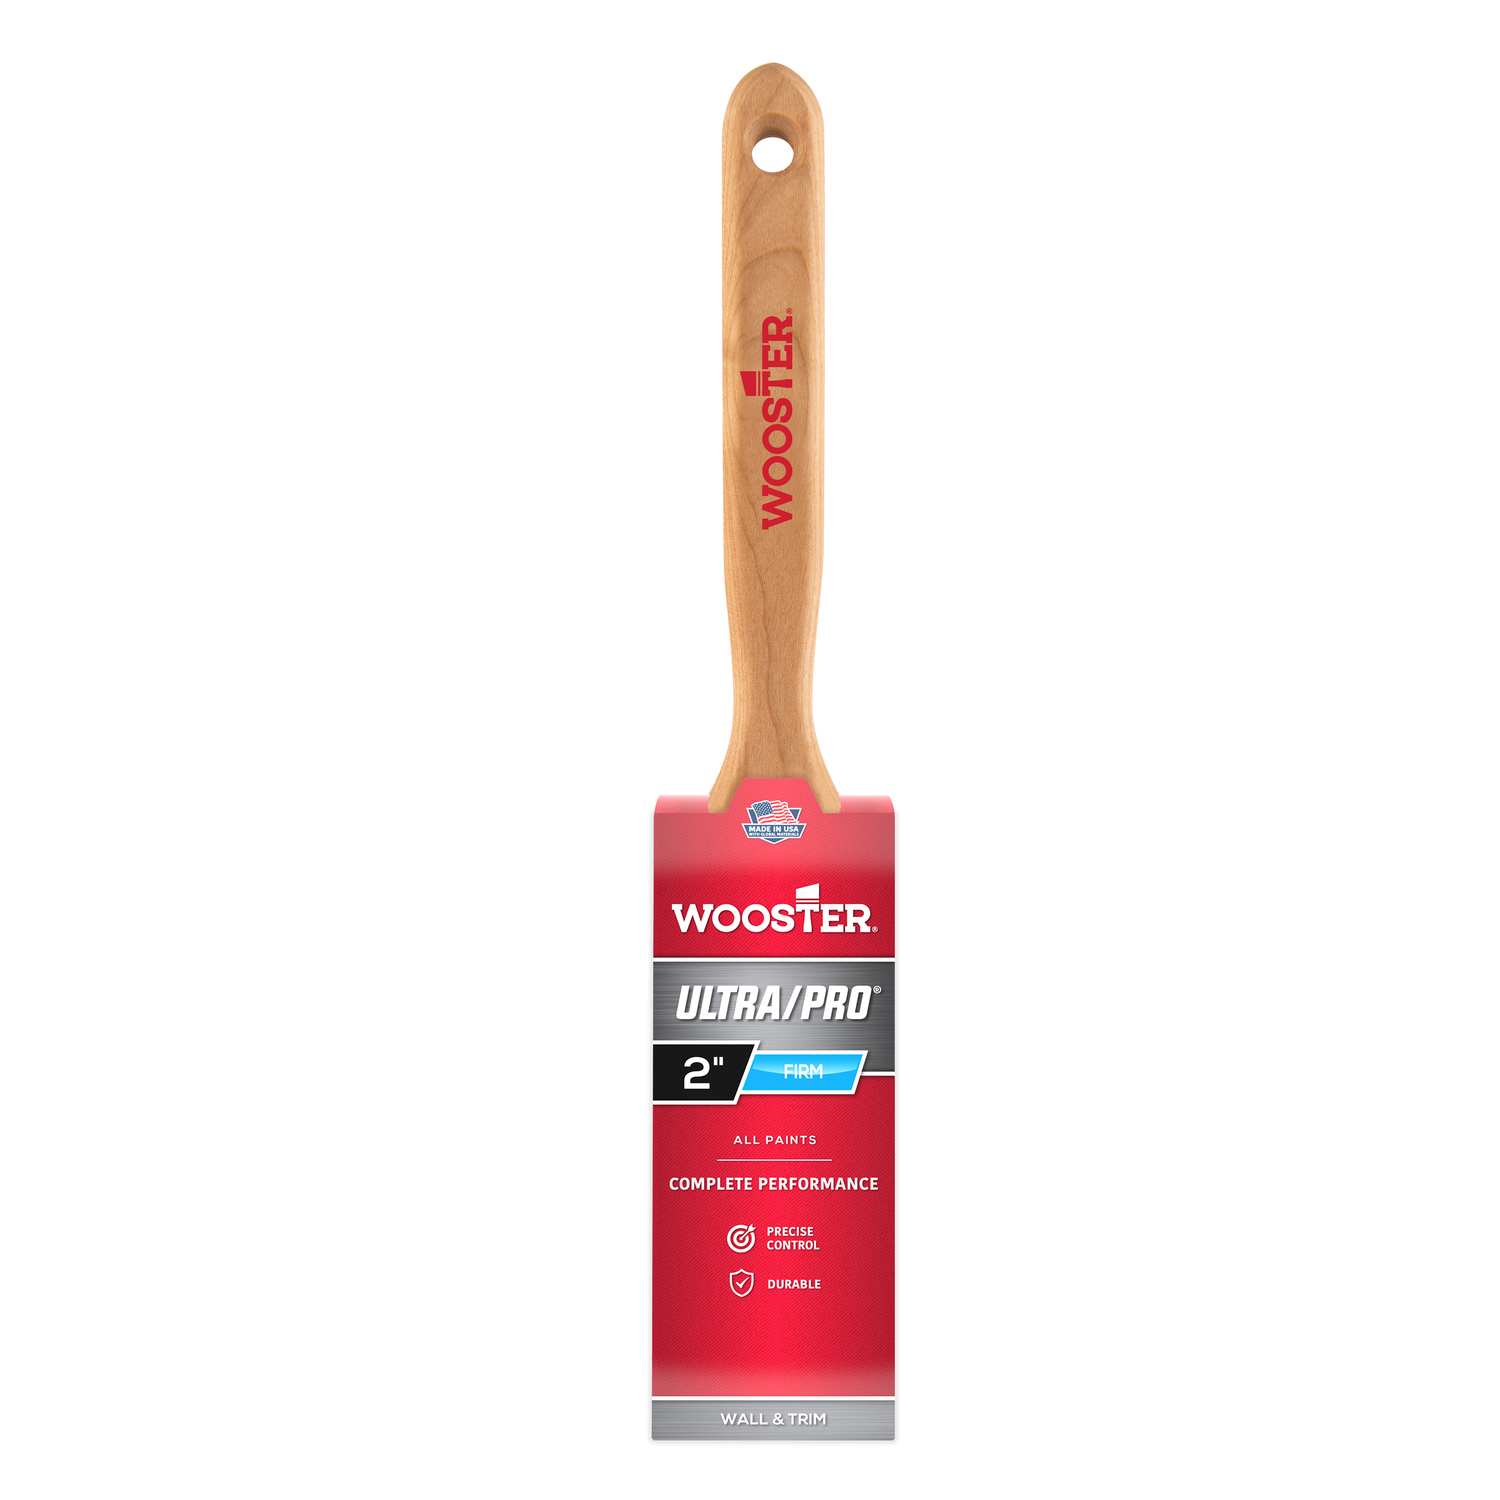 Photos - Putty Knife / Painting Tool Wooster Ultra/Pro 2 in. Flat Paint Brush 4175-2